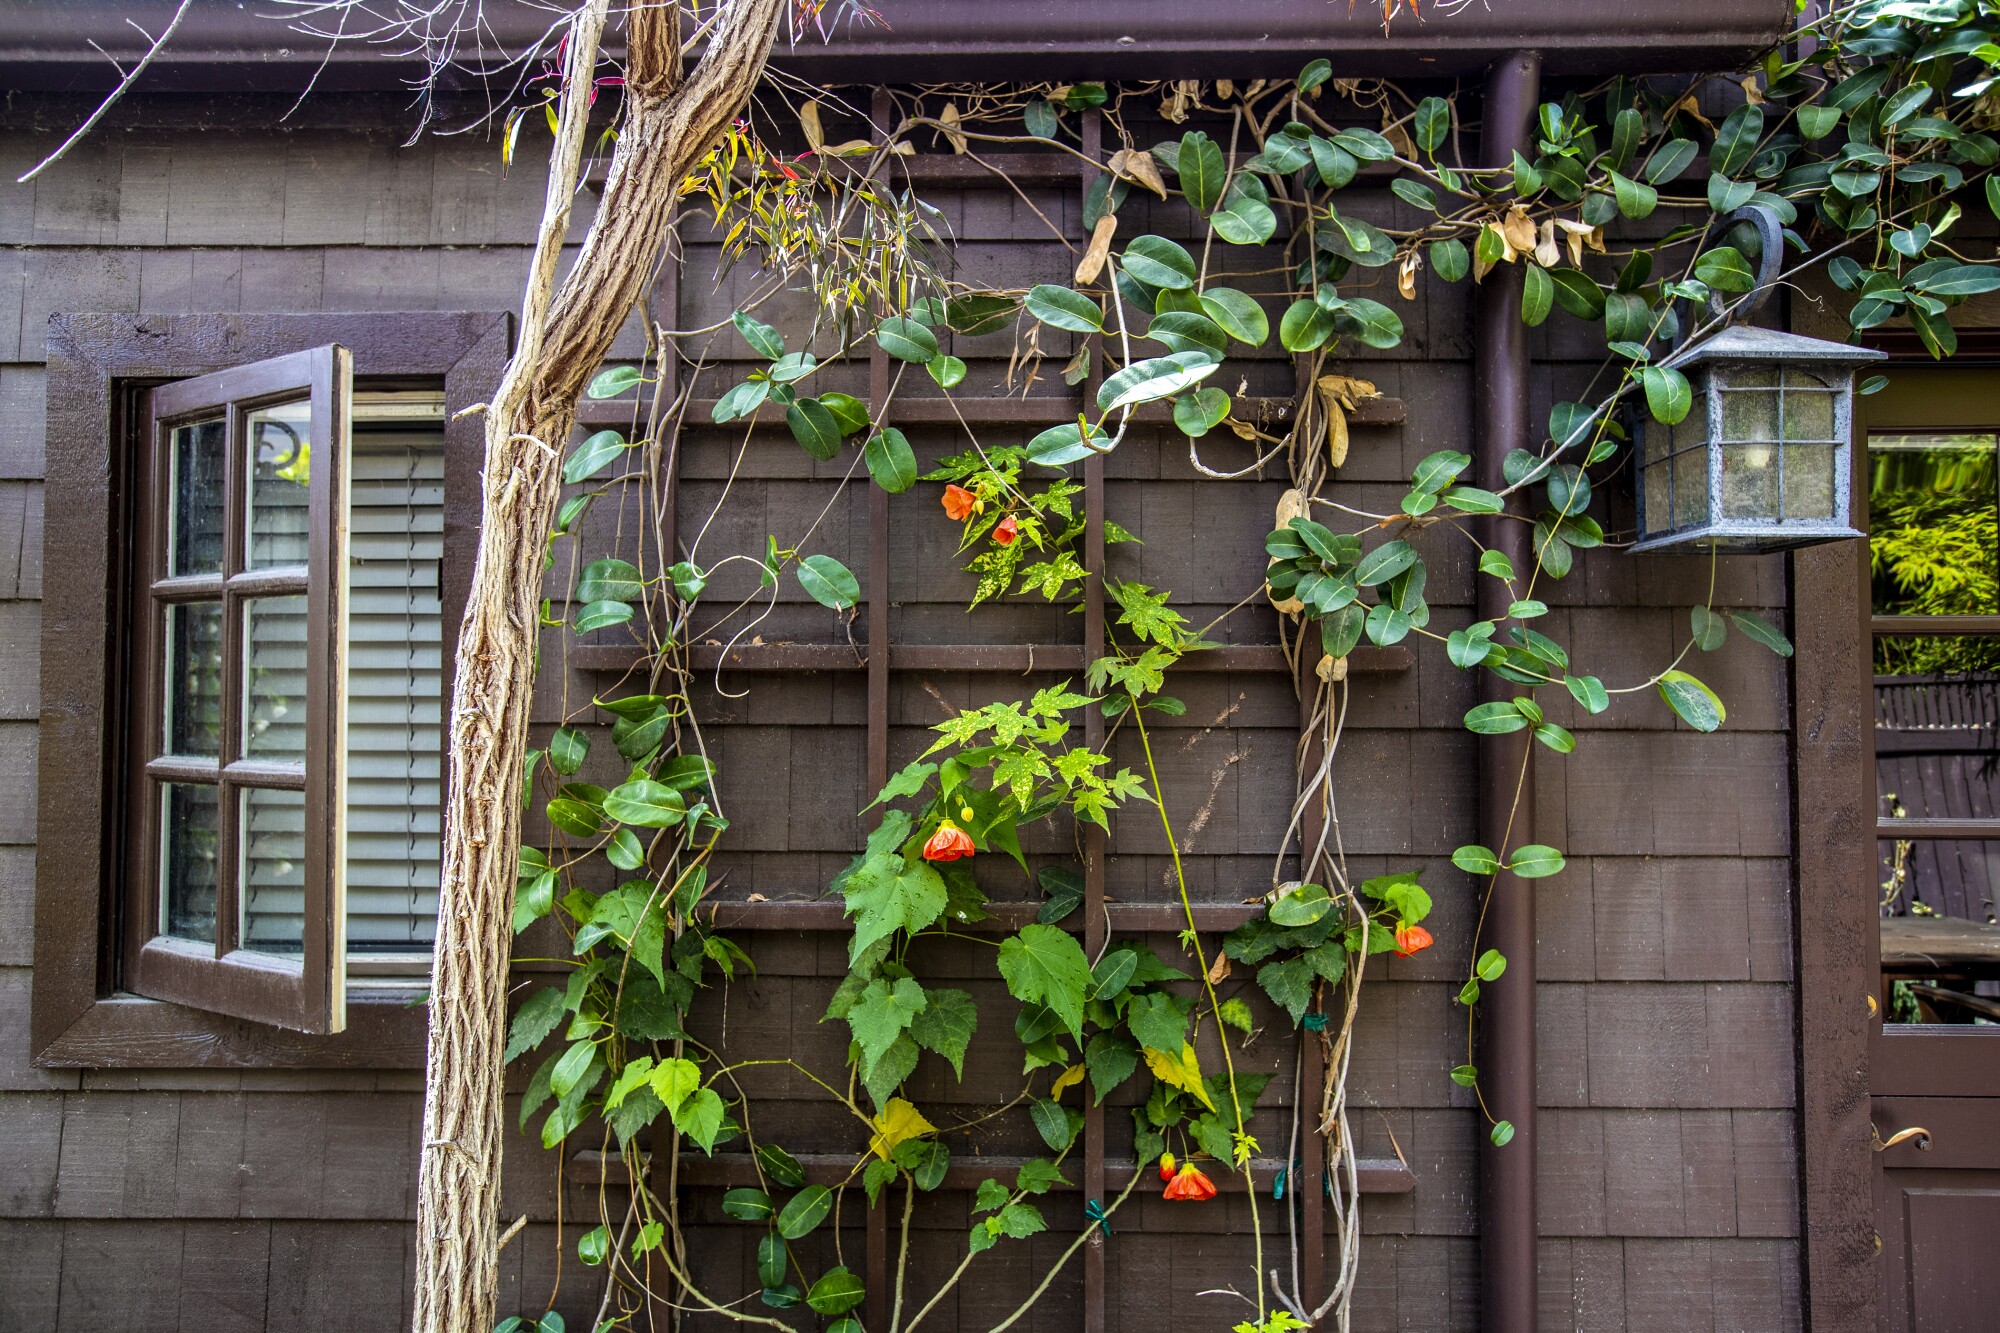 A plant with orange blooms grows on a trellis near a window